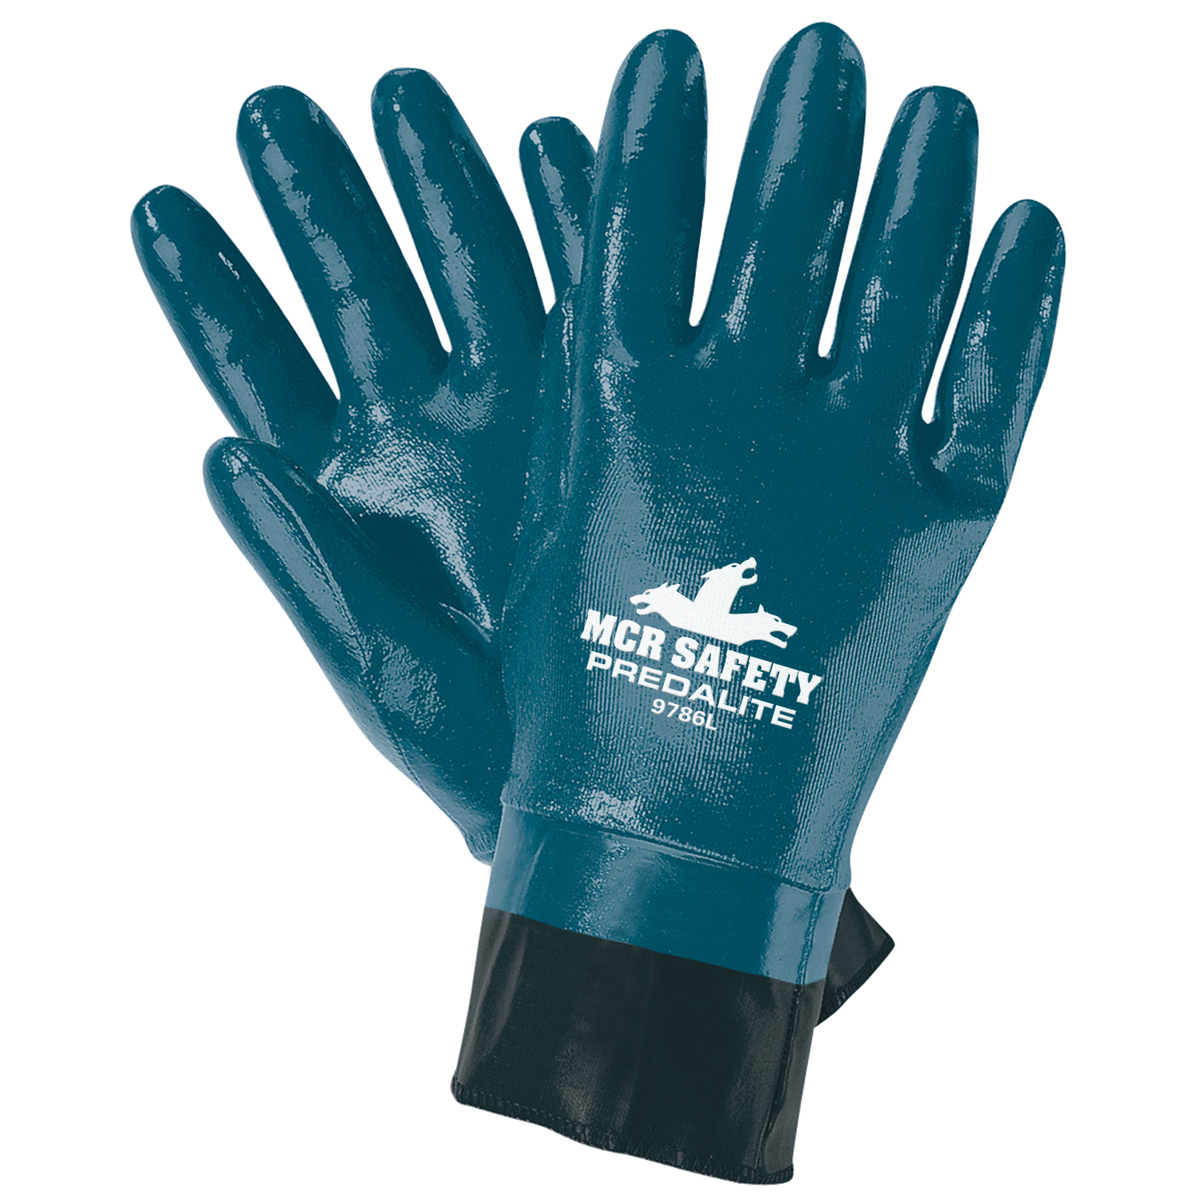 MCR Safety® Large Predalite® Blue Light Nitrile Full Dip Coating Work Gloves With Natural Interlock Liner And PVC Safety Cuff